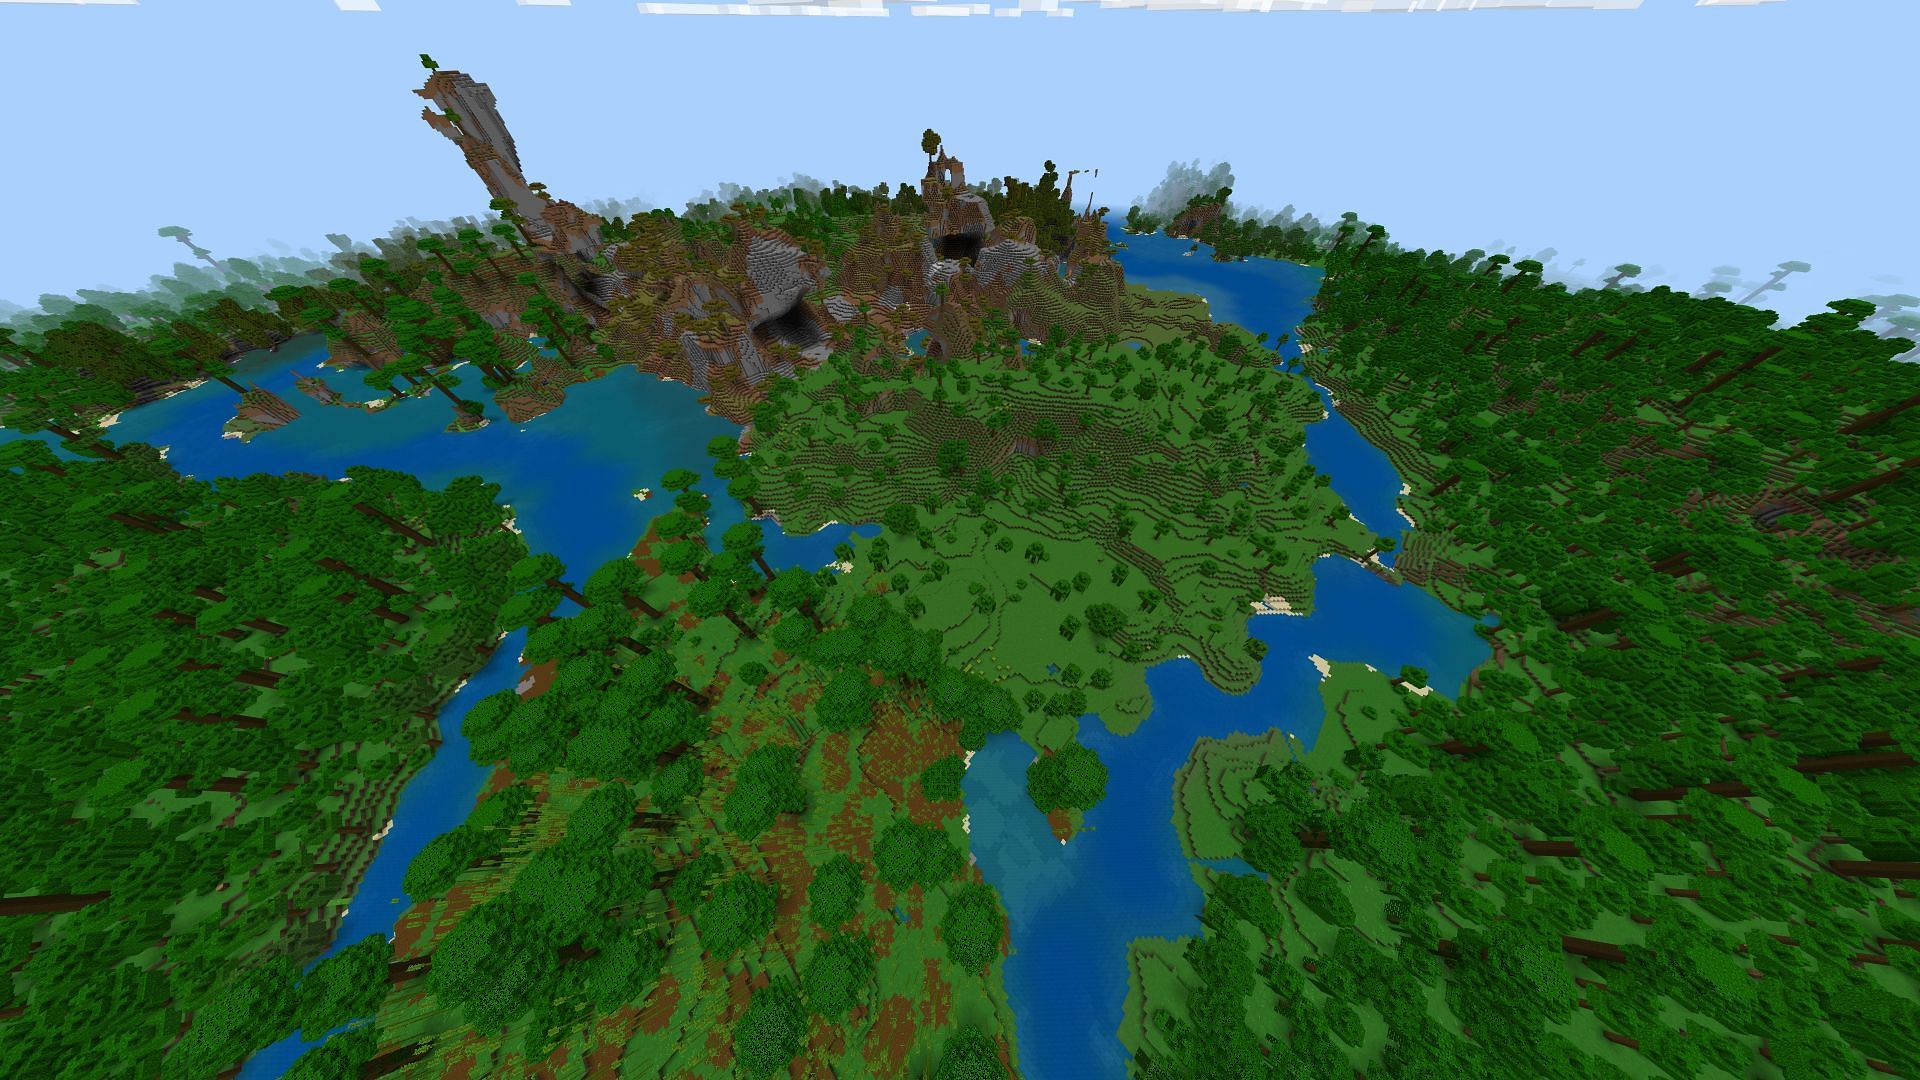 A massive island with winding rivers and multiple biomes awaits players in this seed (Image via Mojang)